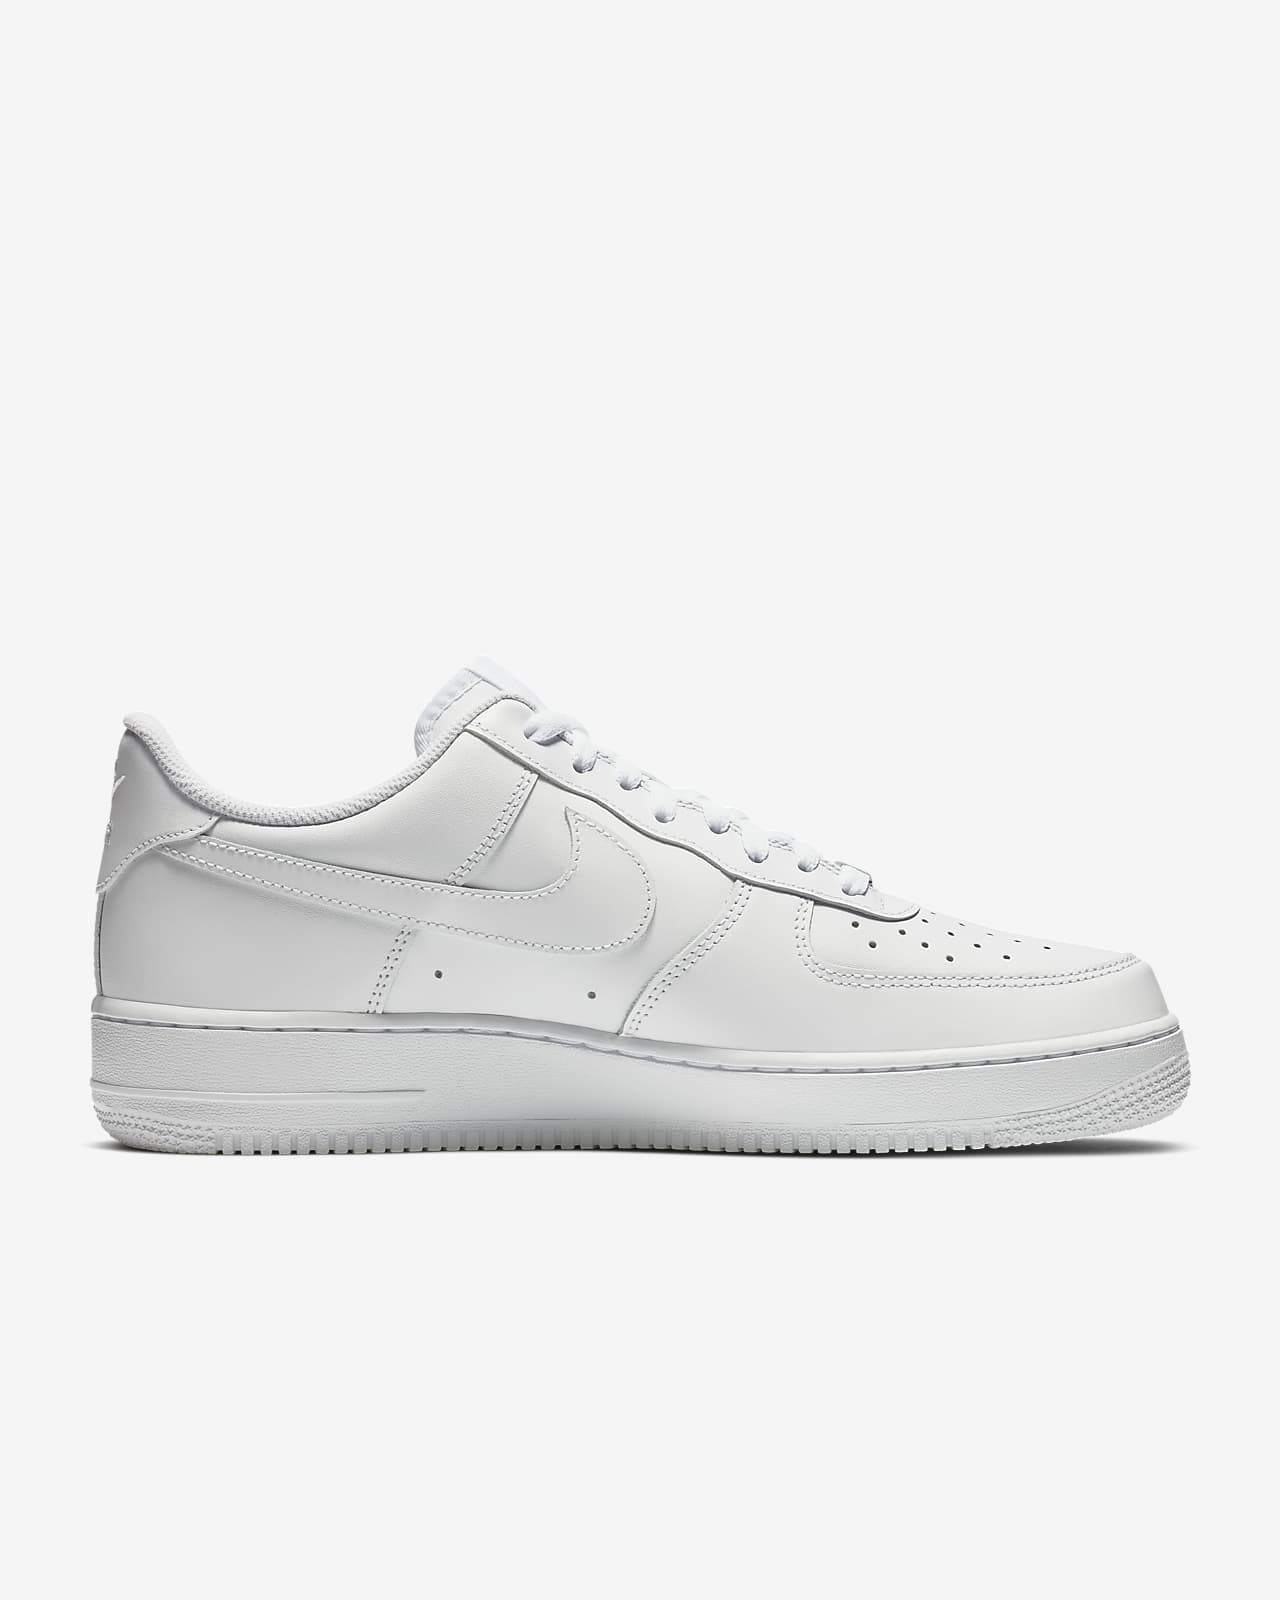 size 7.5 air force ones